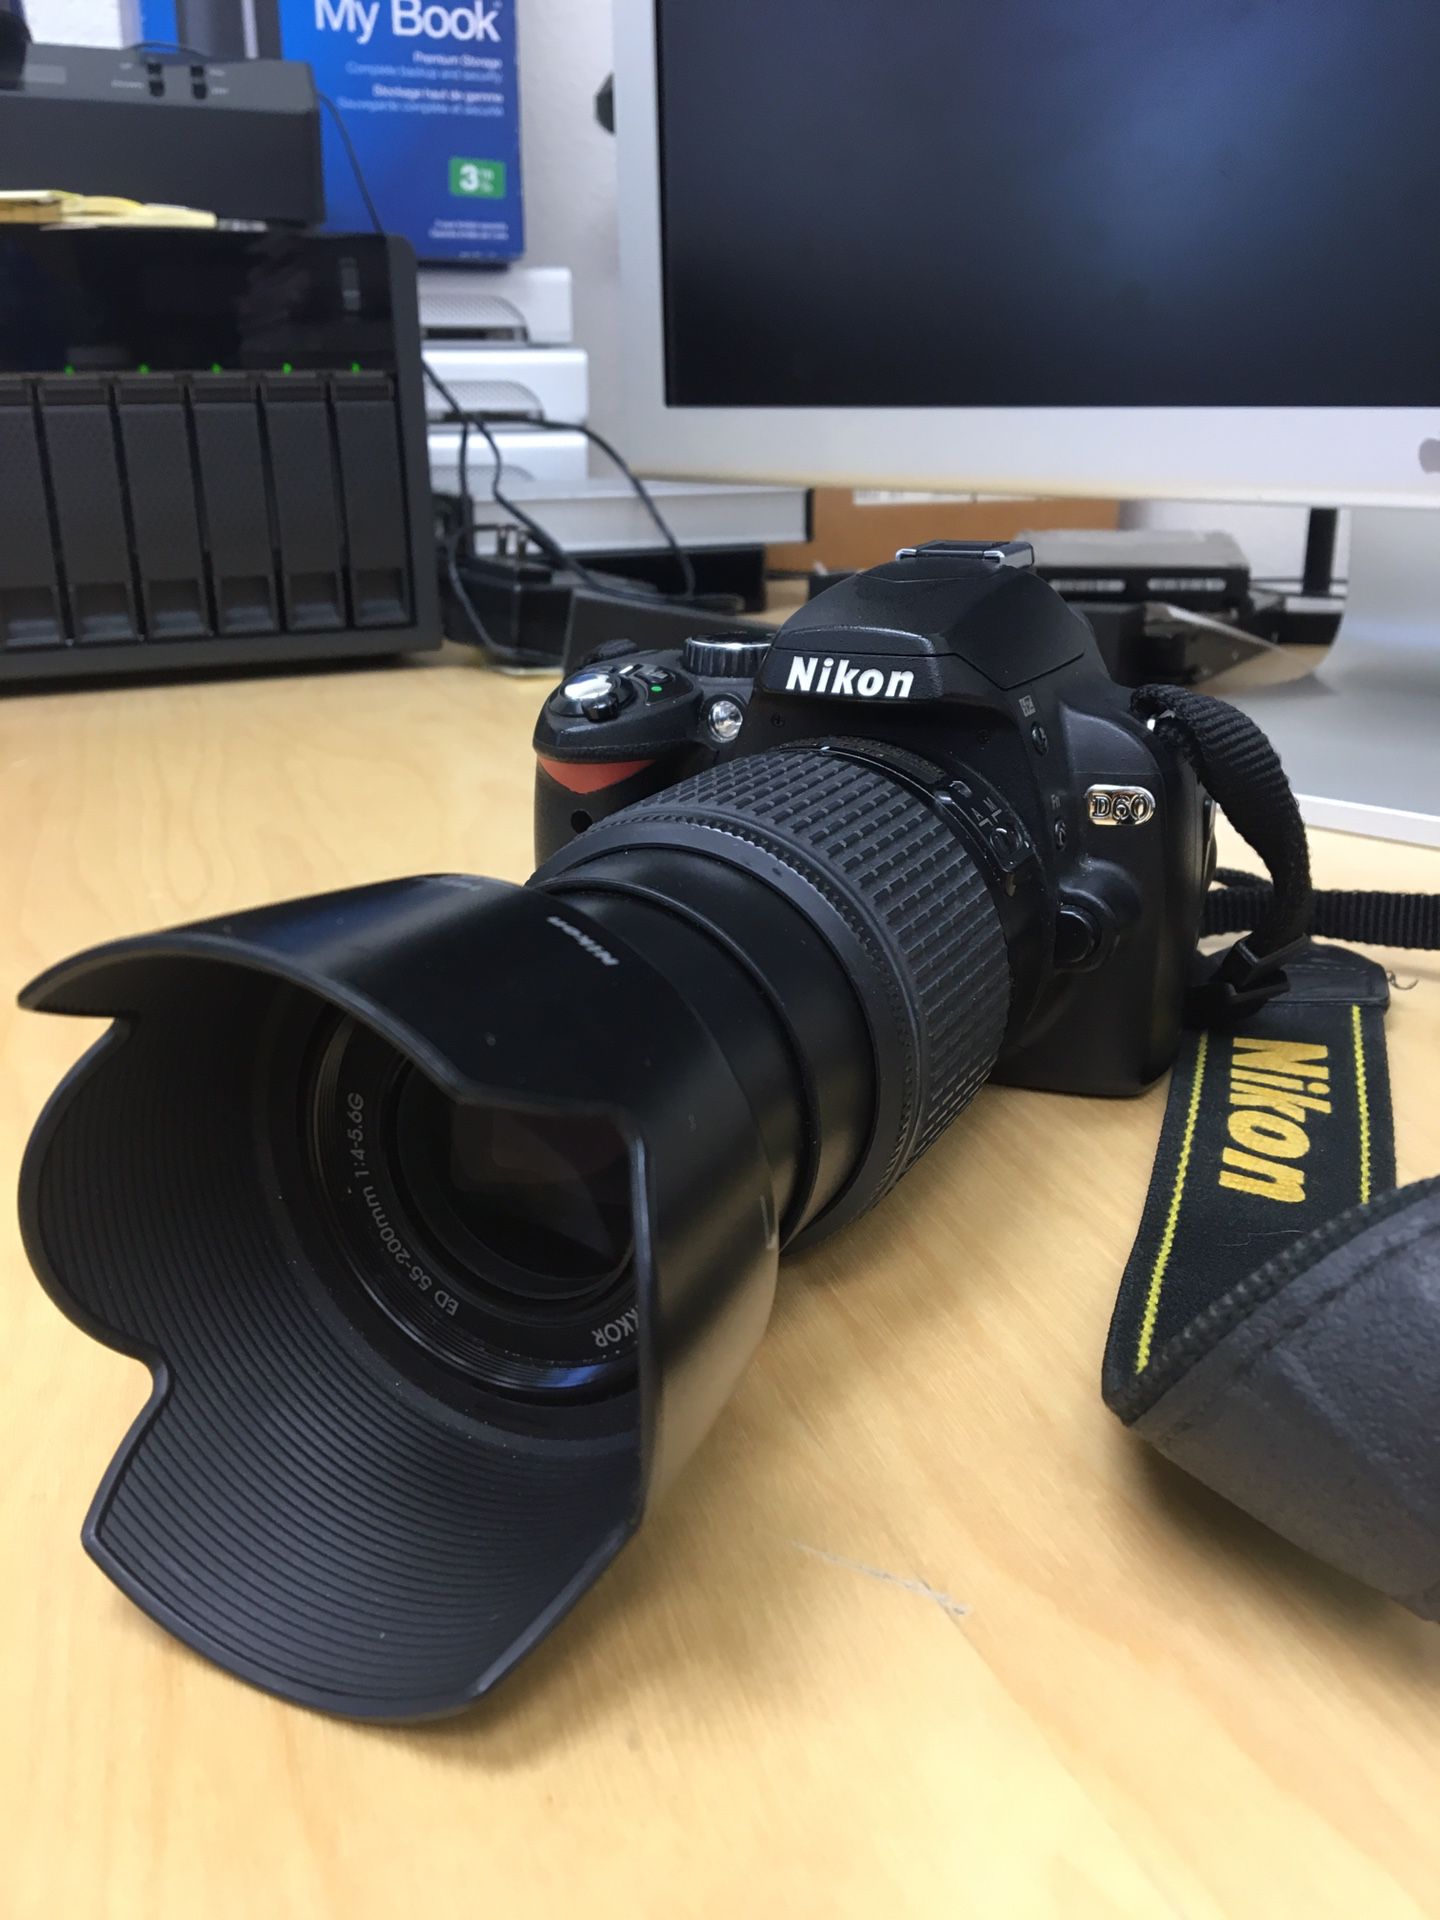 Nikon D60 with 55-200mm f/4.0-5.7g Telephoto lens